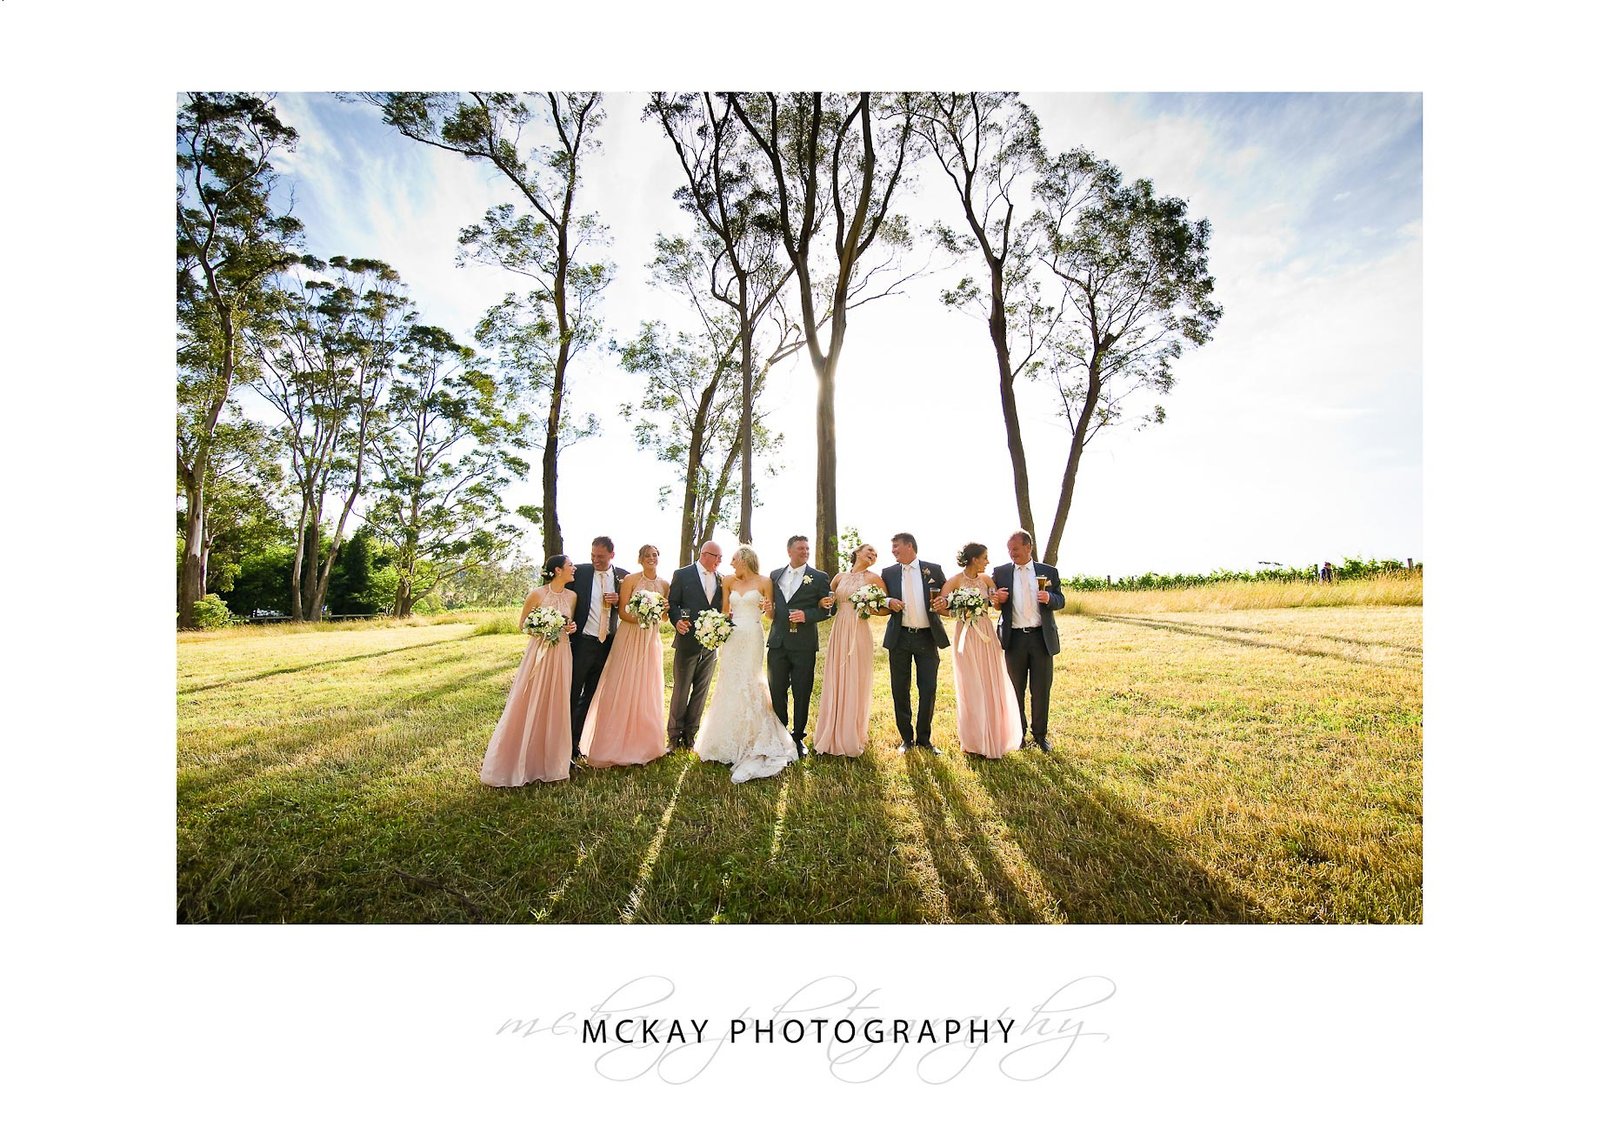 Bridal party photo grass field